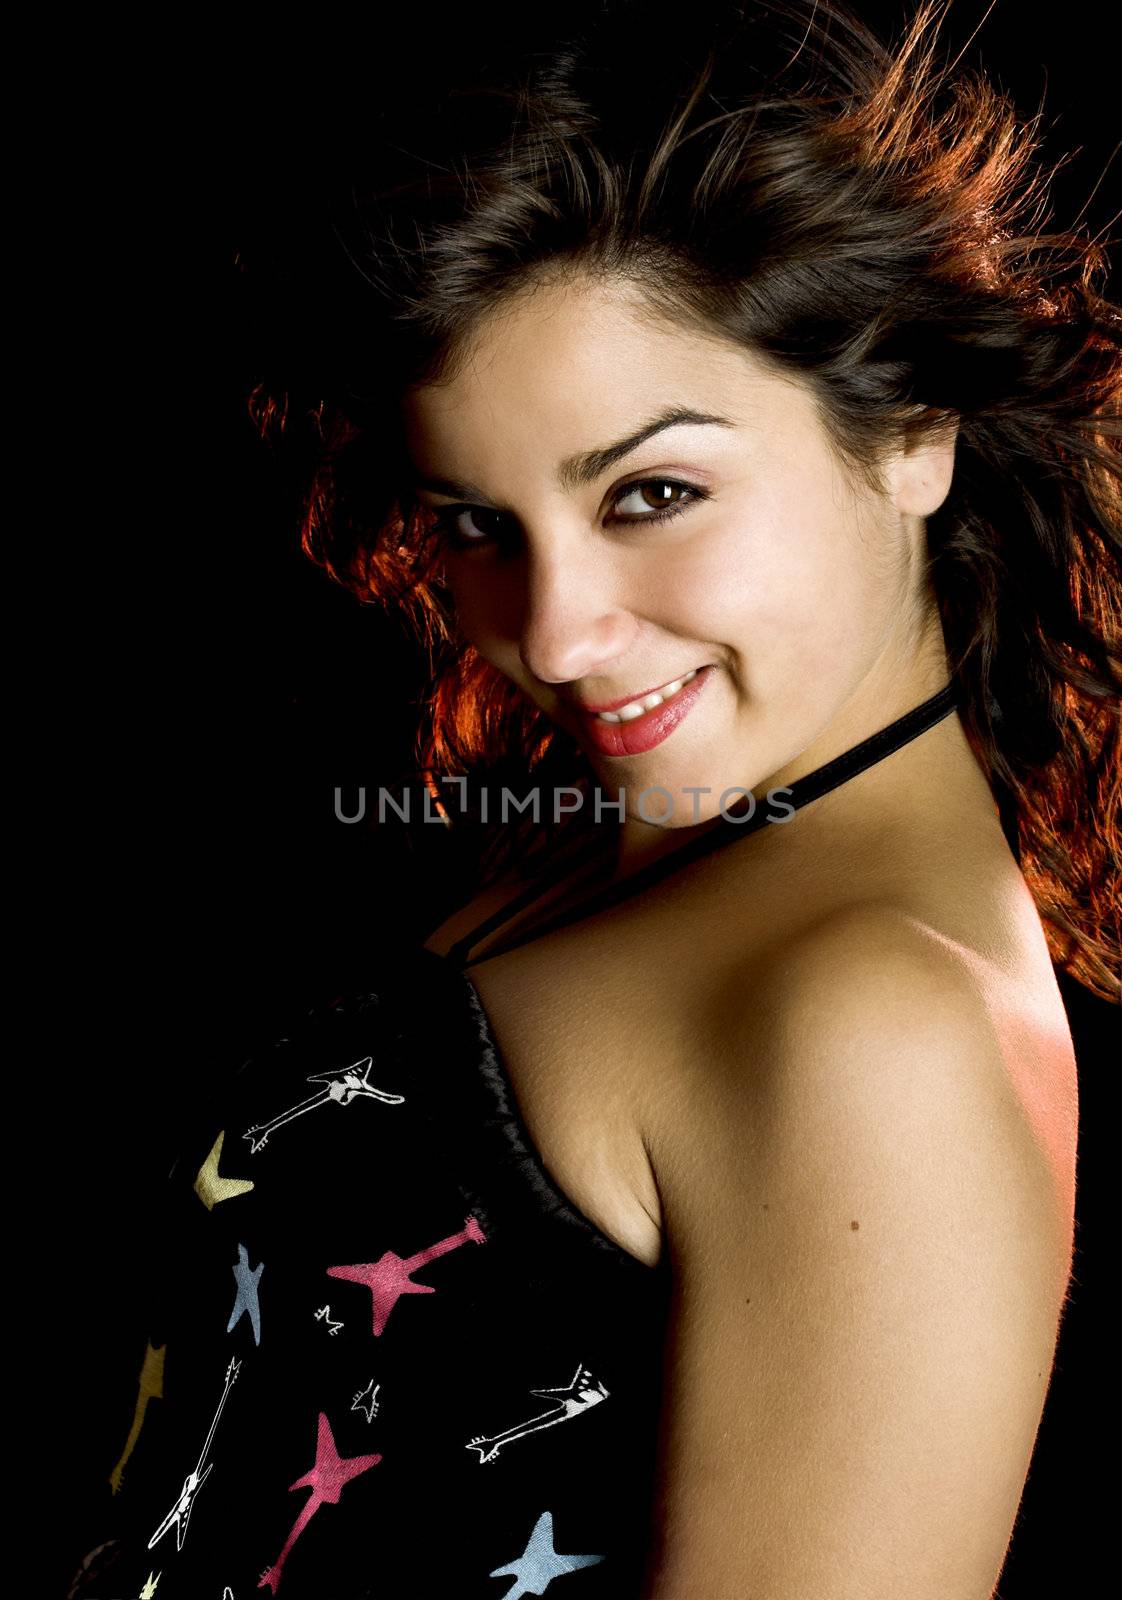 Portrait of a beautiful young and attractive woman on a black background